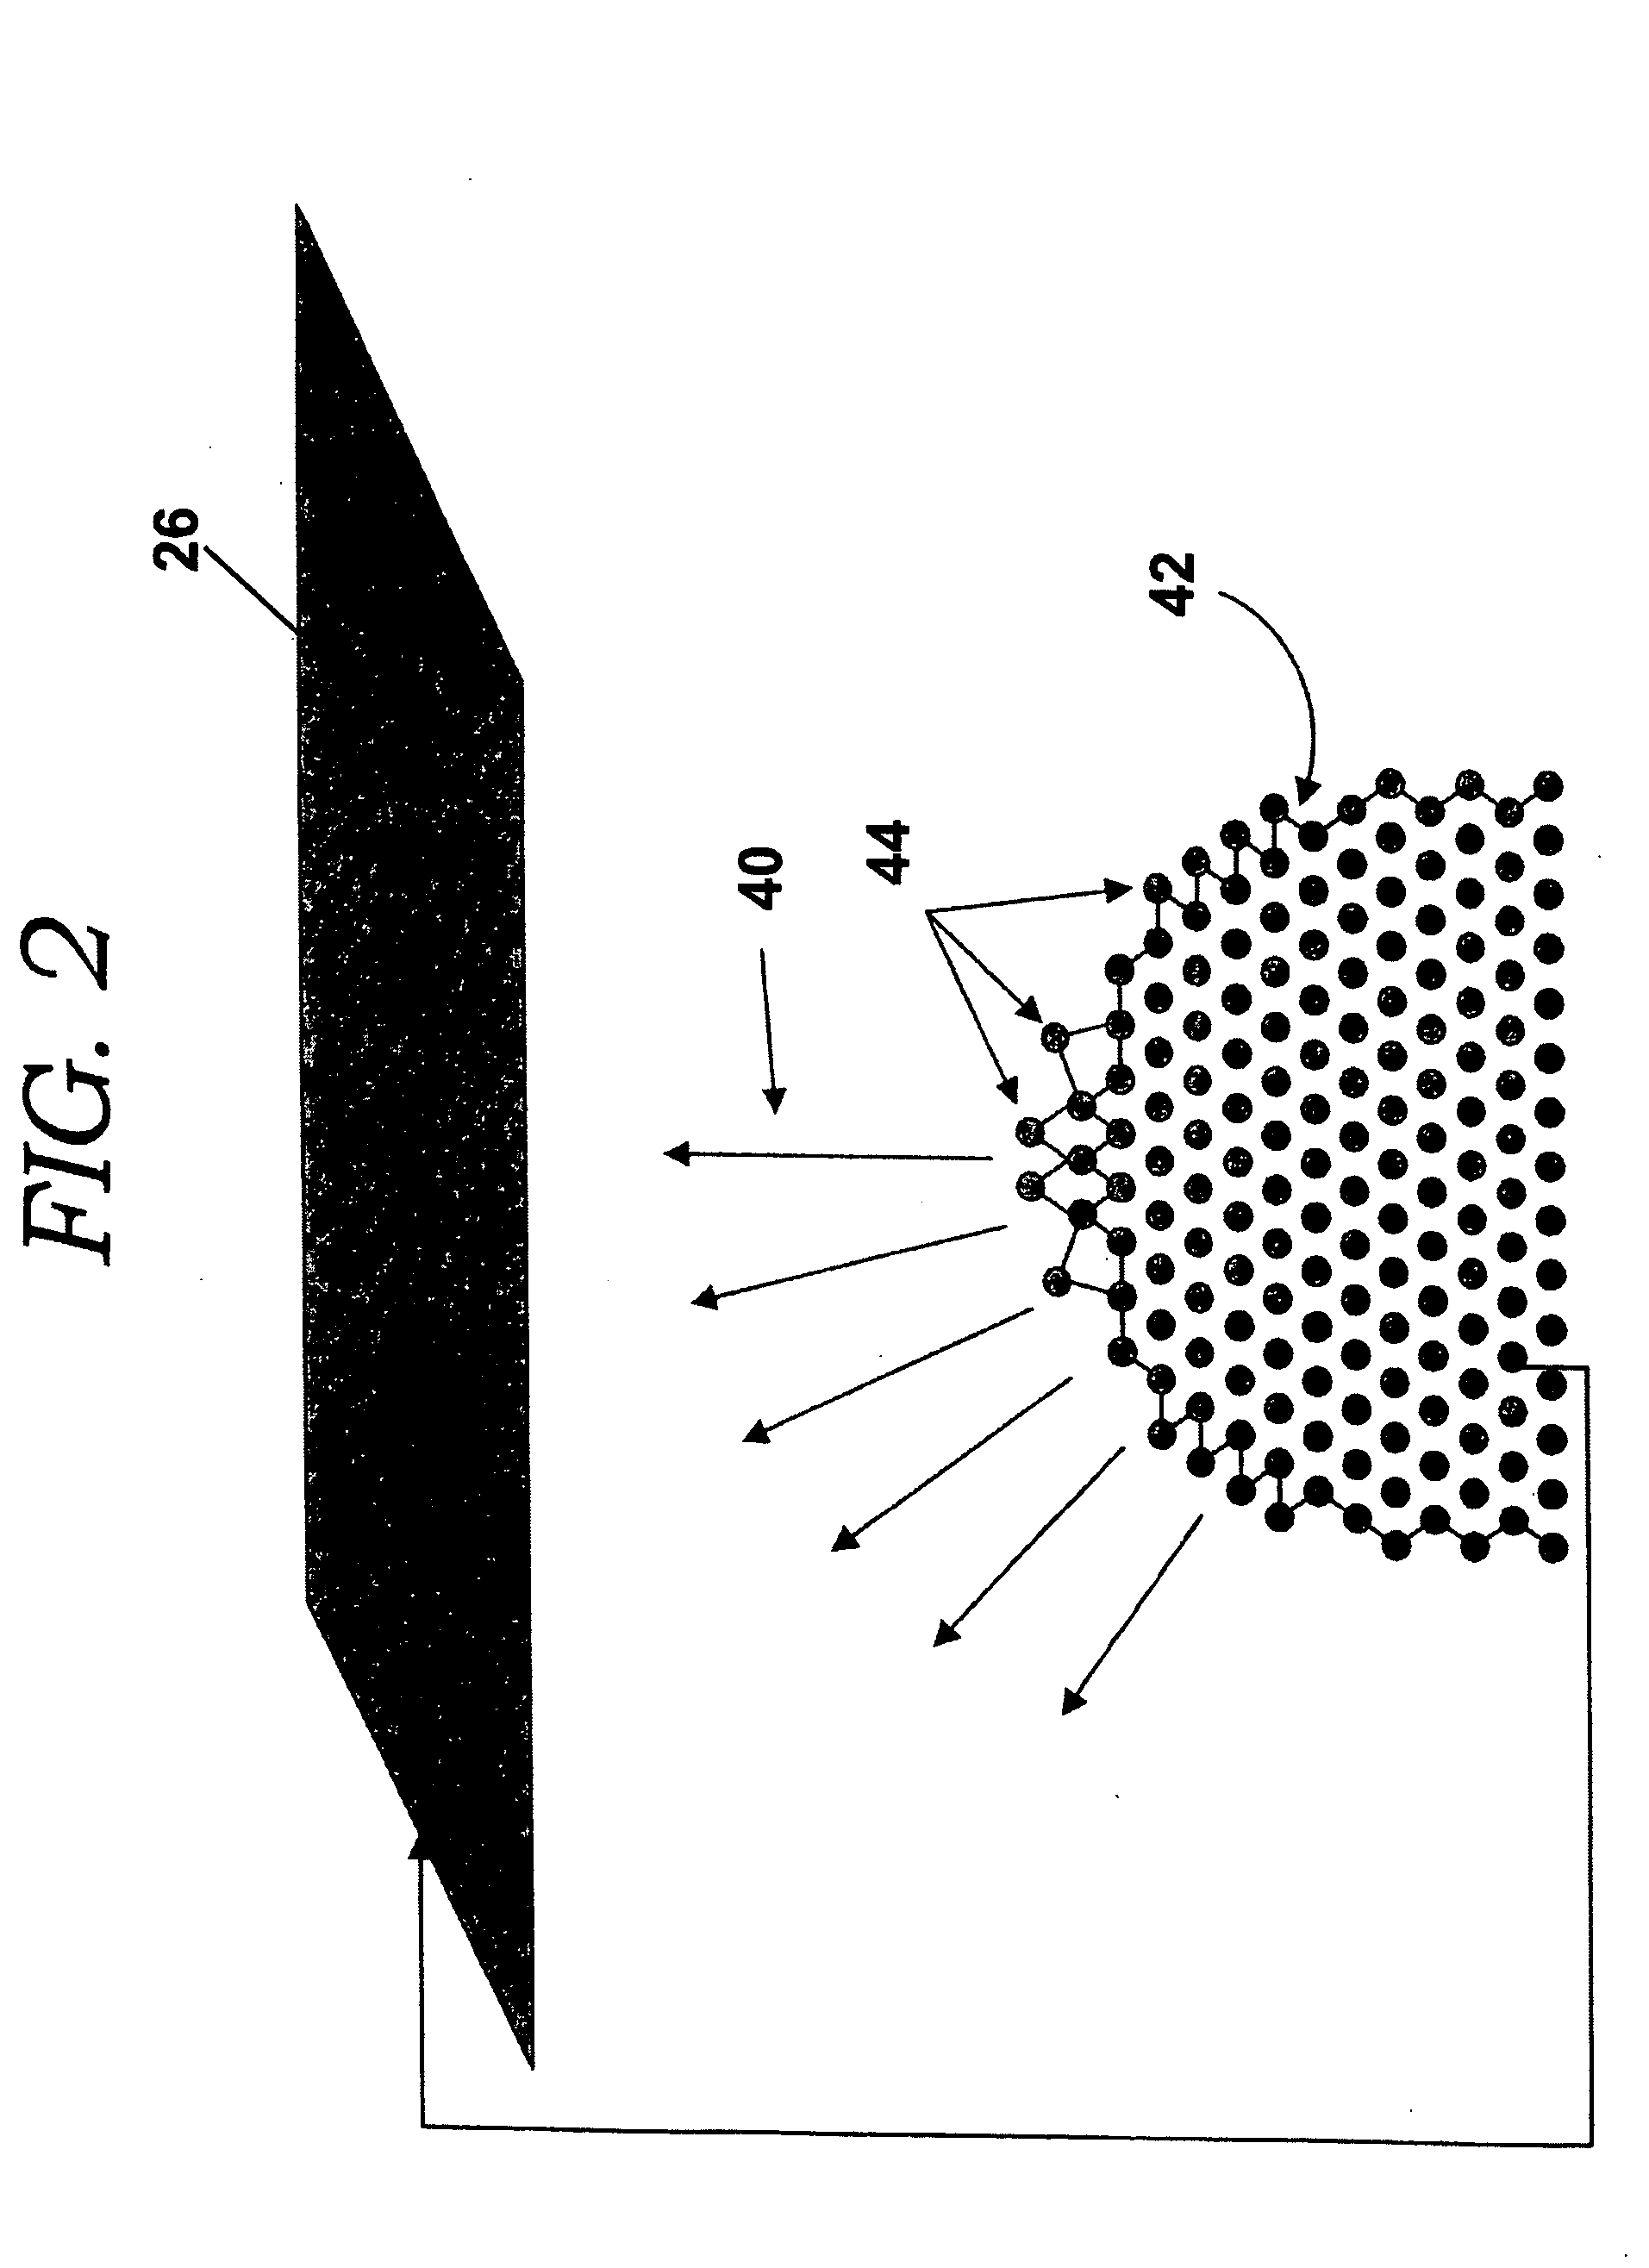 Laser stimulated atom probe characterization of semiconductor and dielectric structures